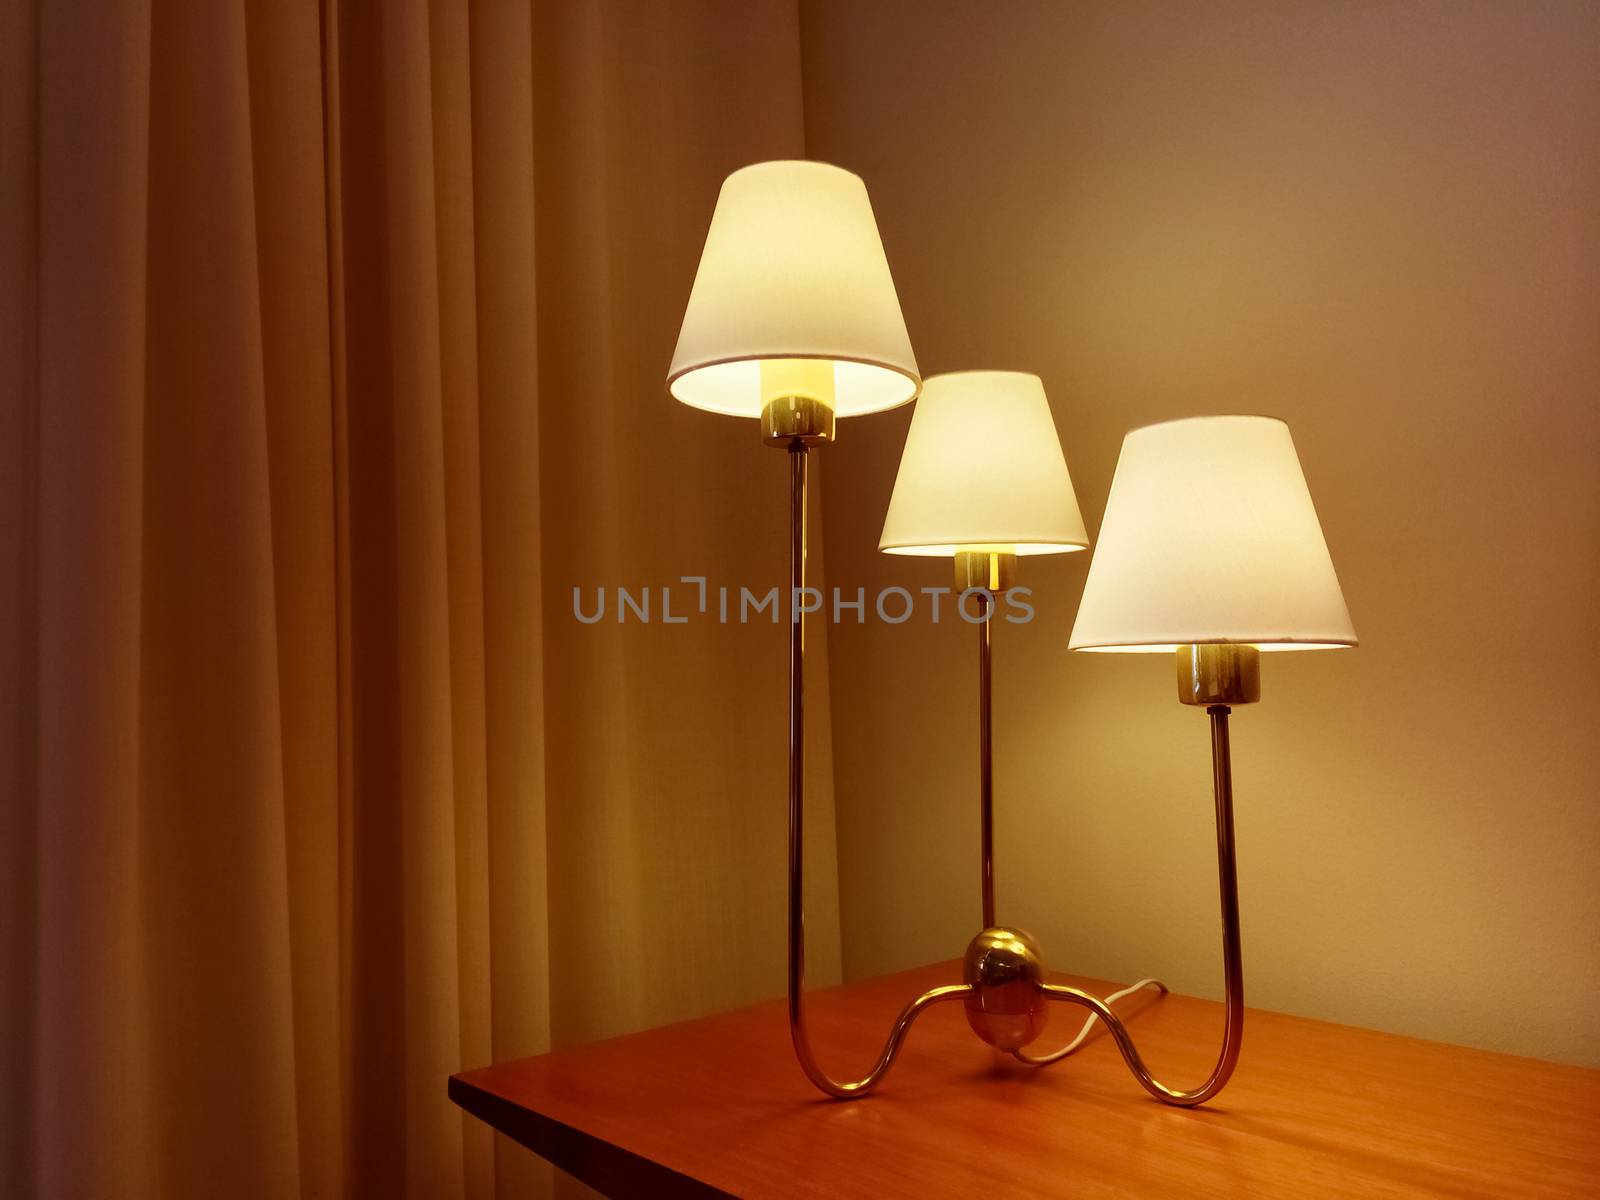 Classic style table lamp on wooden furniture, decorating a room.